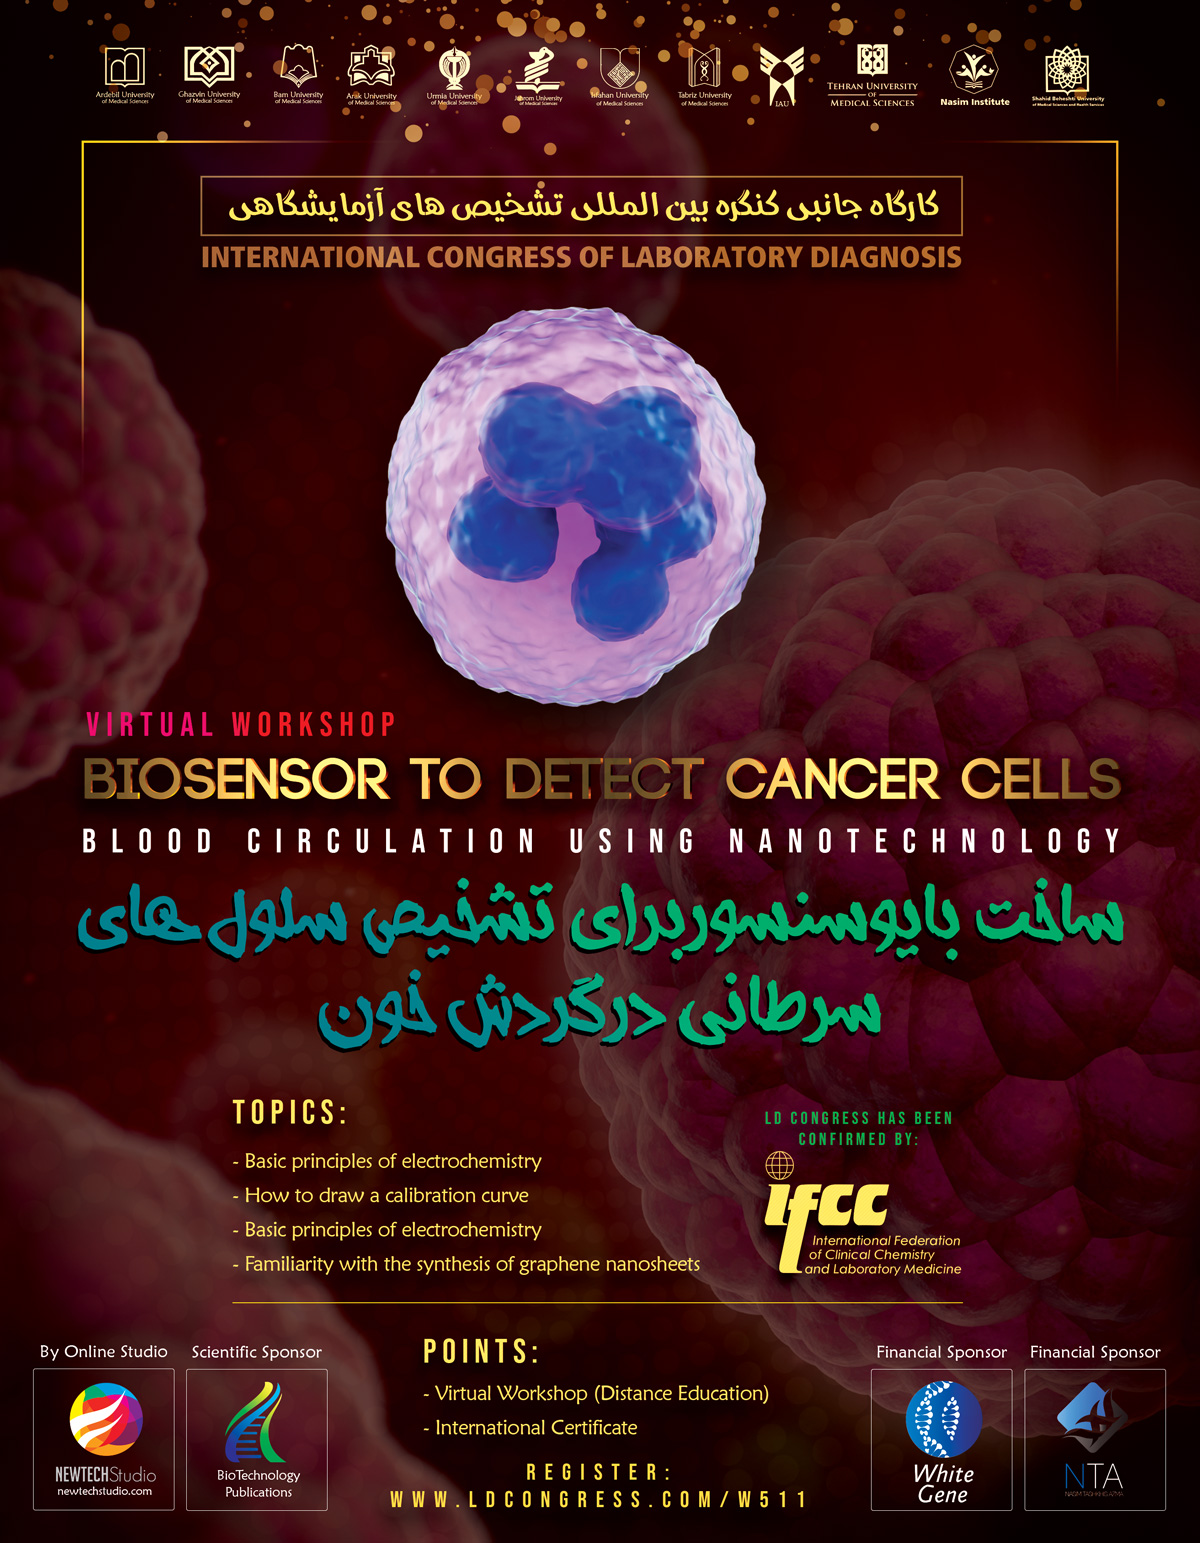 Construction of an Electrochemical Biosensor to Detect Circulating Cancer Cells Using Nanotechnology